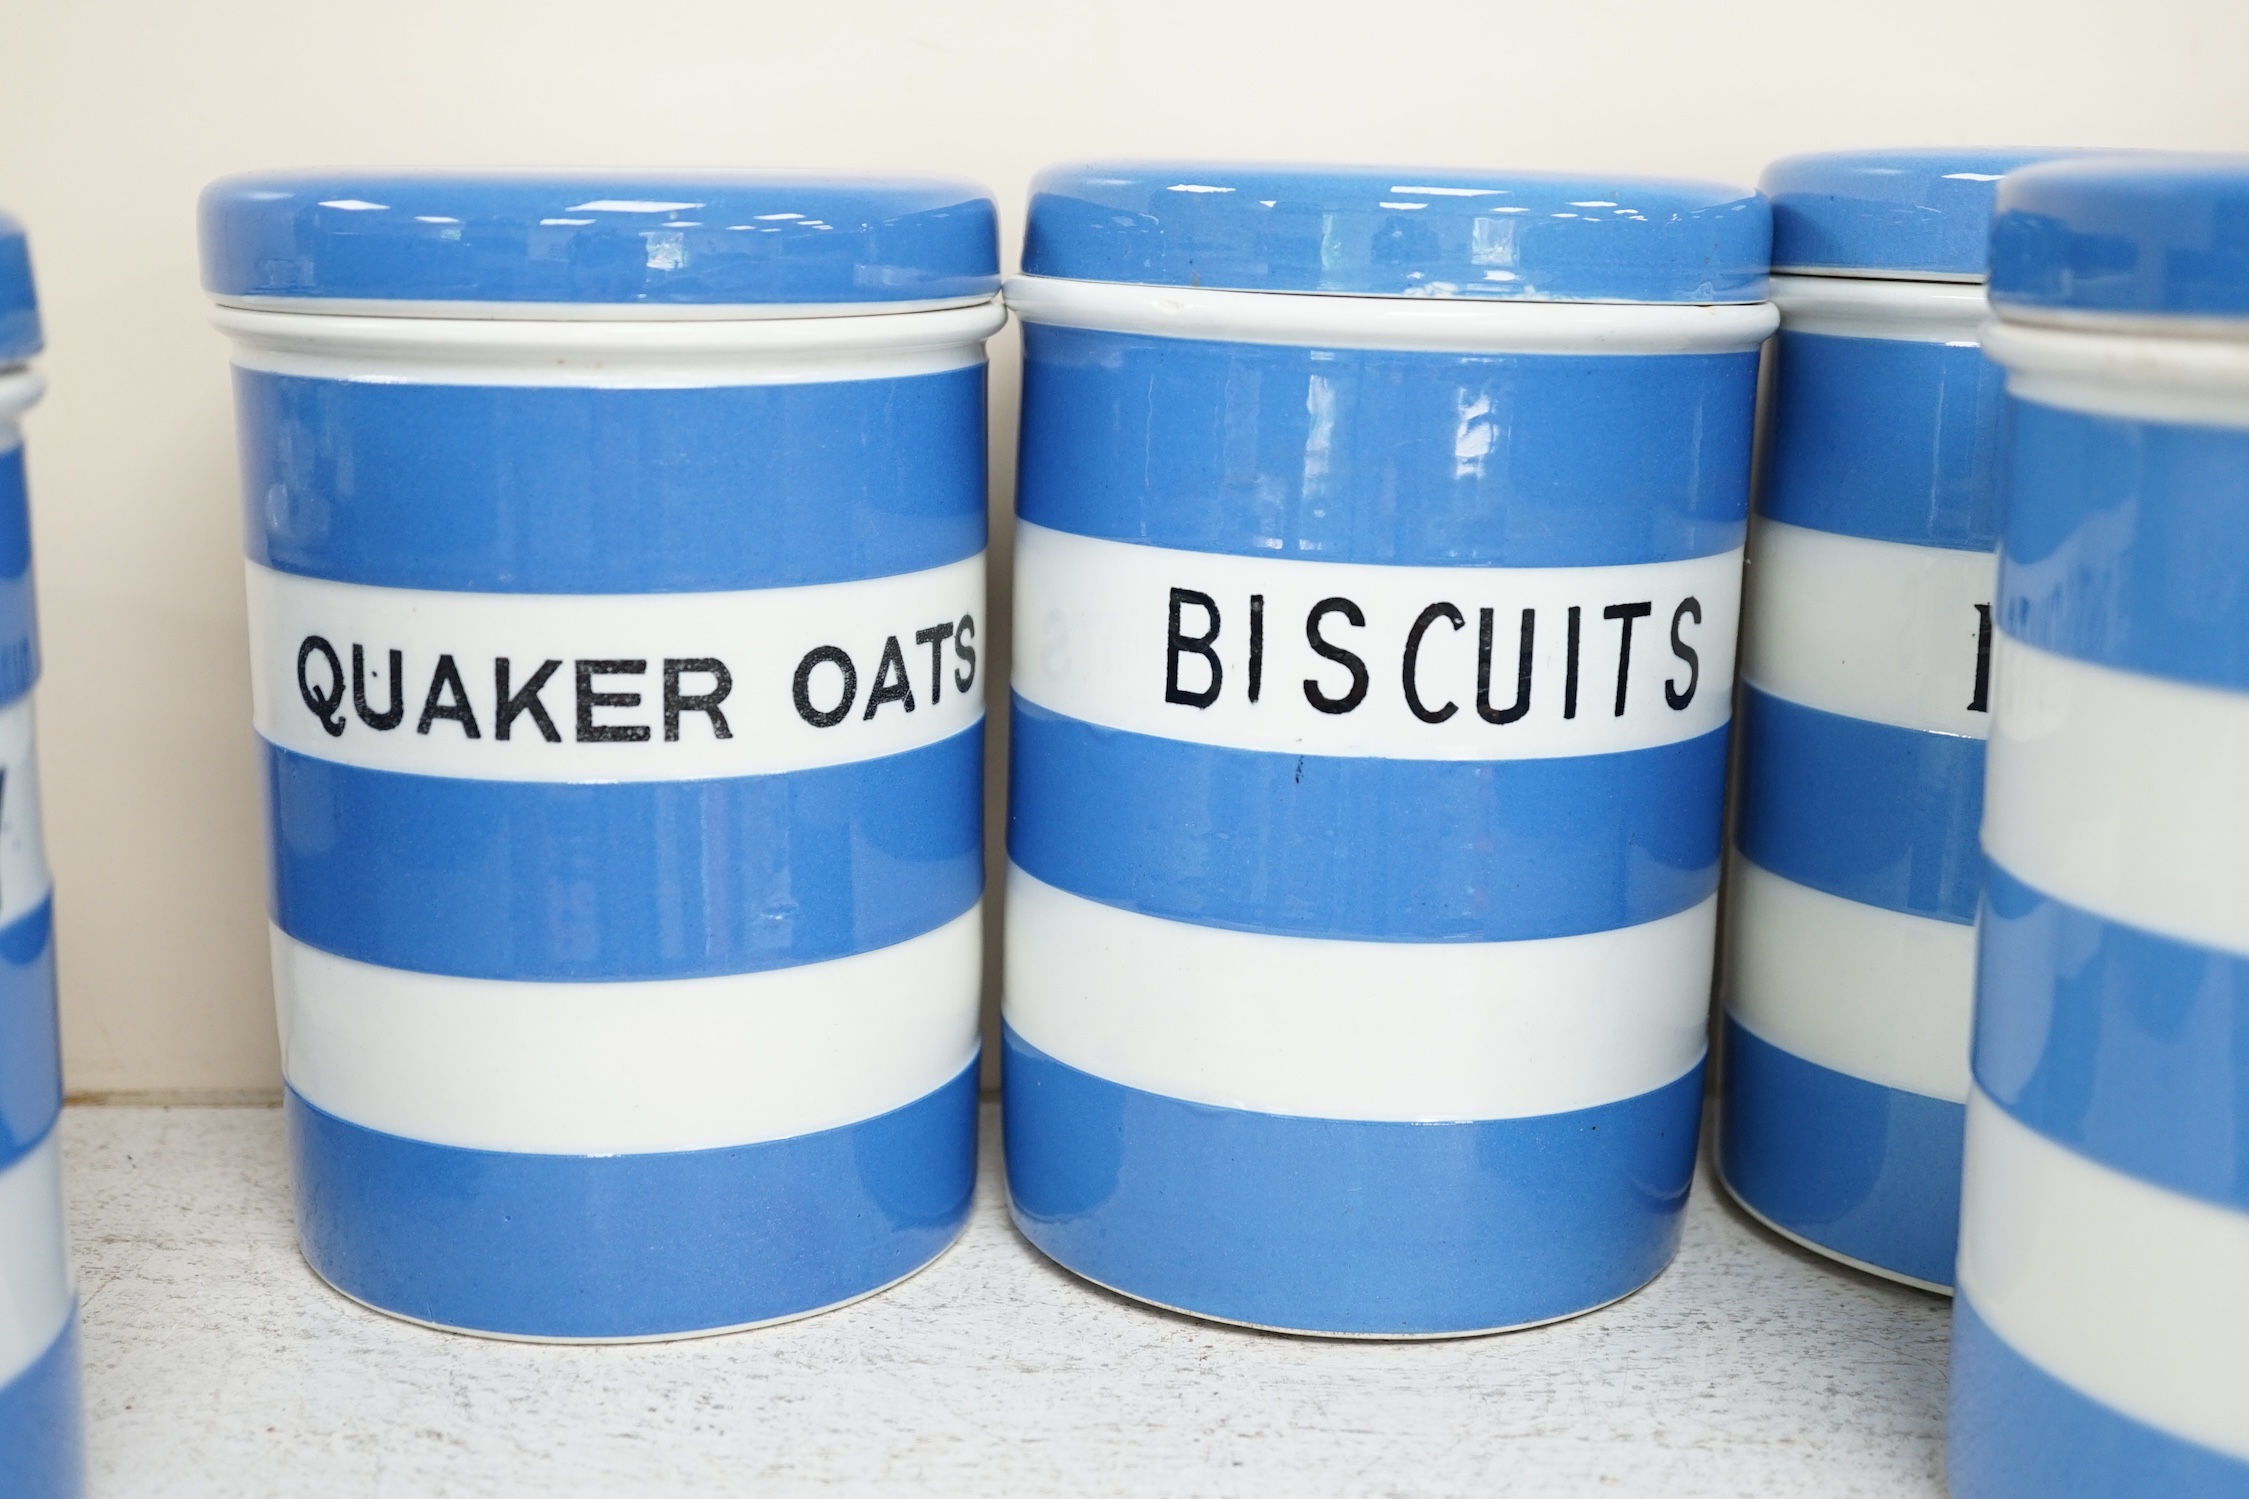 T.G.Green Cornish Kitchenware, eight 17cm lidded storage jars, comprising Currants, Caster Sugar, Granulated Sugar, Indian Tea, Macaroni, Biscuits, Pearl Barley and Quaker , Oats, Black Shield marks. Condition - fair to